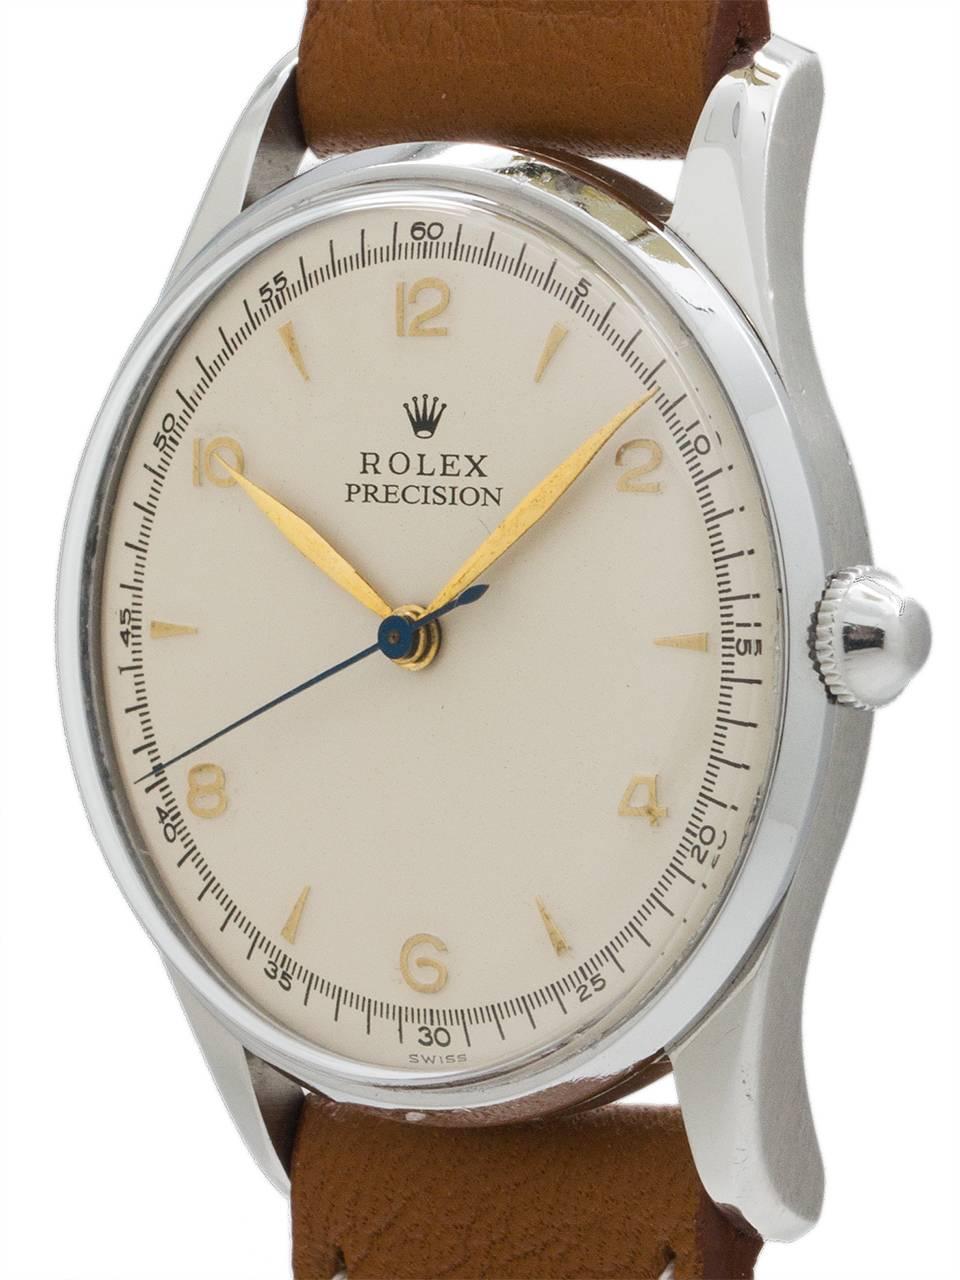 Rolex Stainless Steel manual wind dress model ref 5517 circa 1950’s. Featuring a 32 mm diameter snap back case with acrylic crystal and older antique white restored dial with raised gold numbers and indexes. With beautiful gold leaf hands, and a